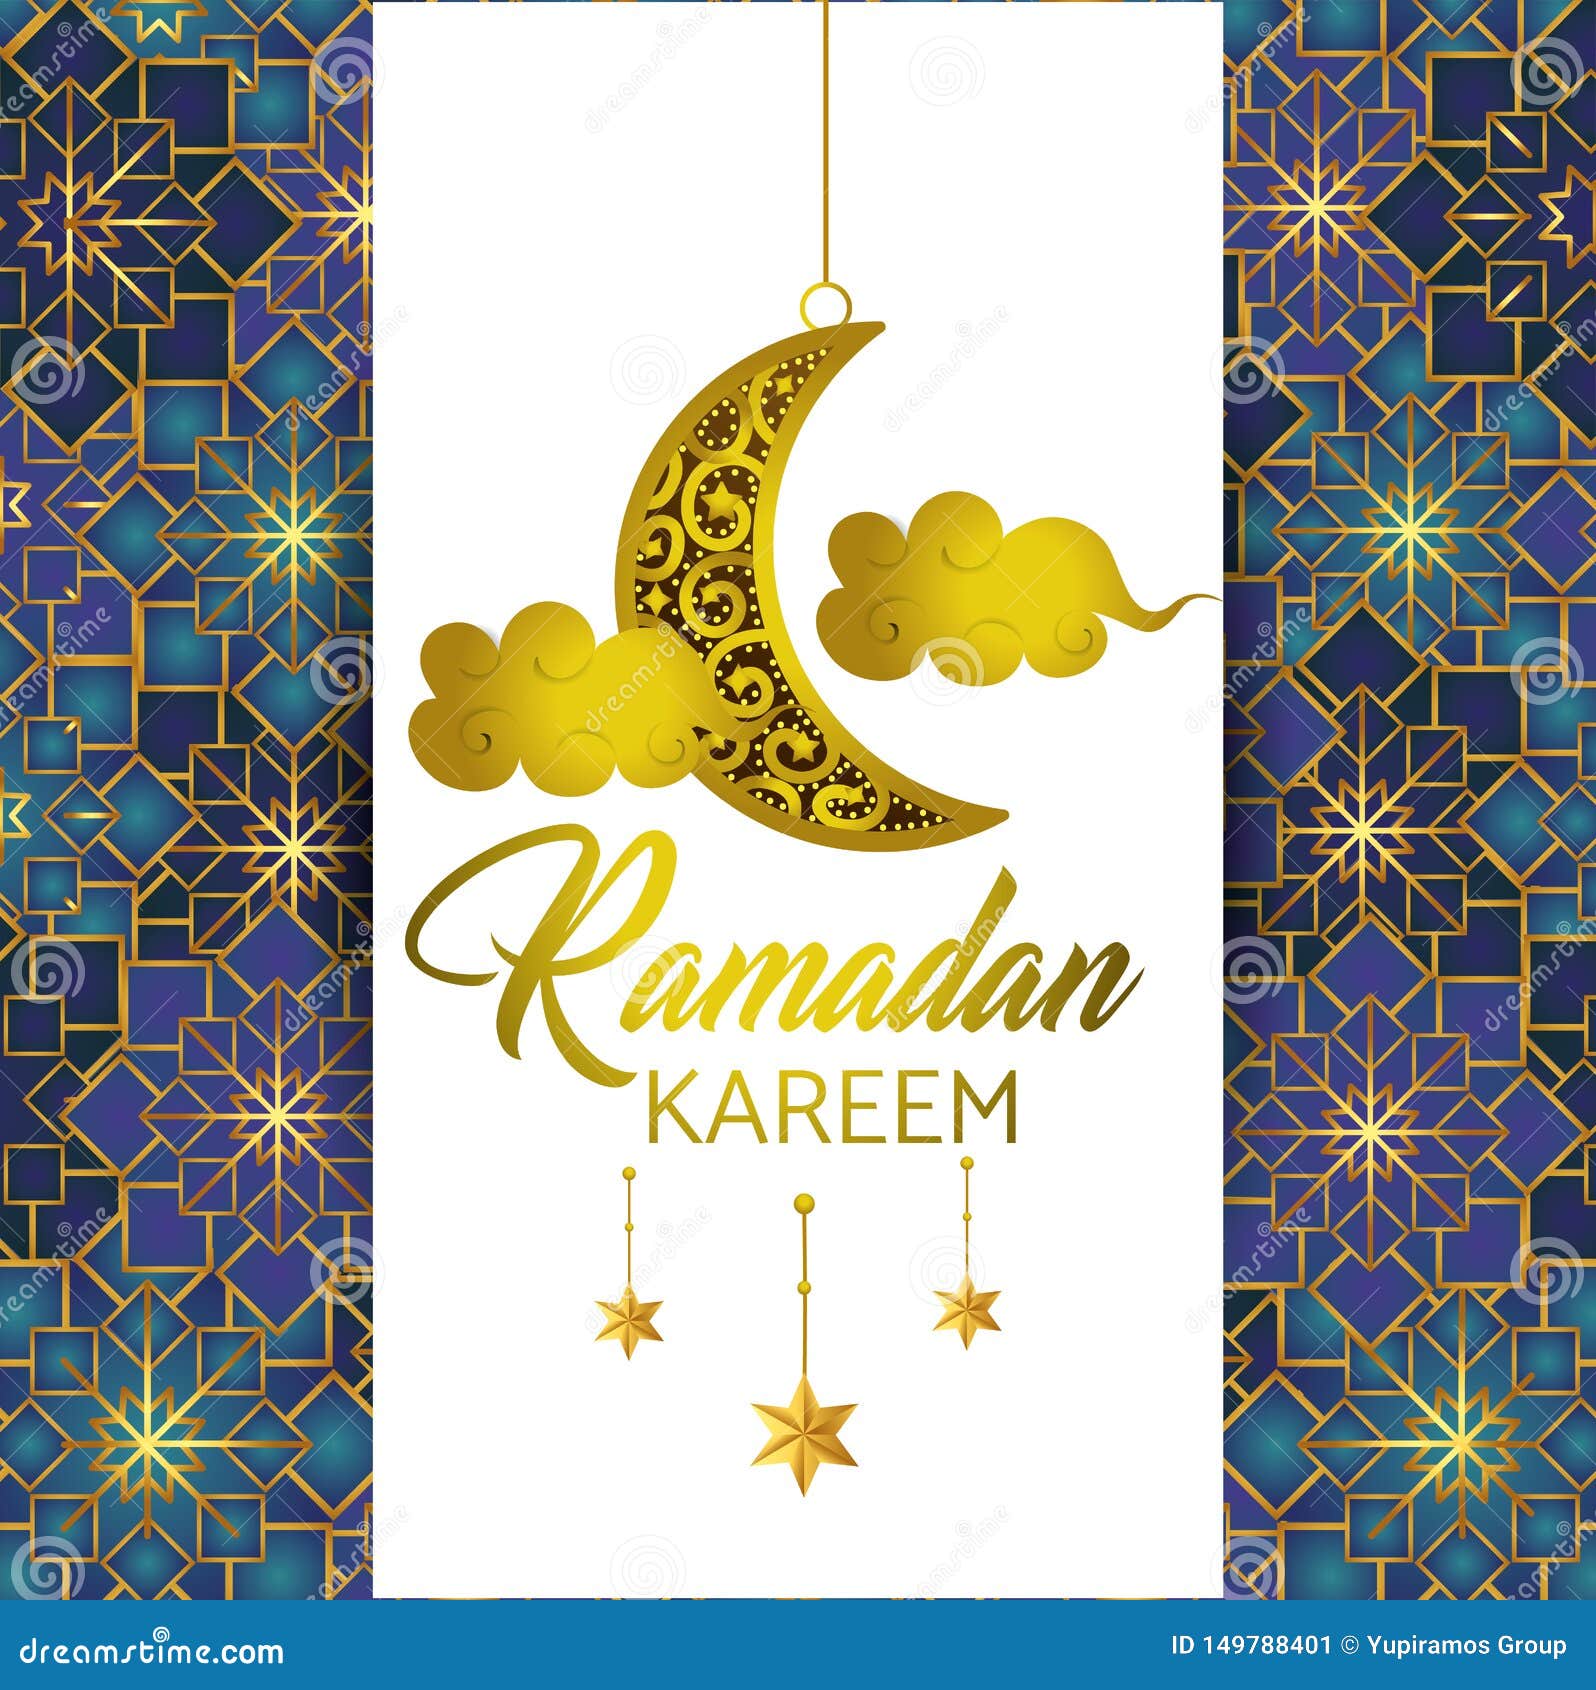 Ramadan Kareem And Card With Moon And Clouds Stock Vector